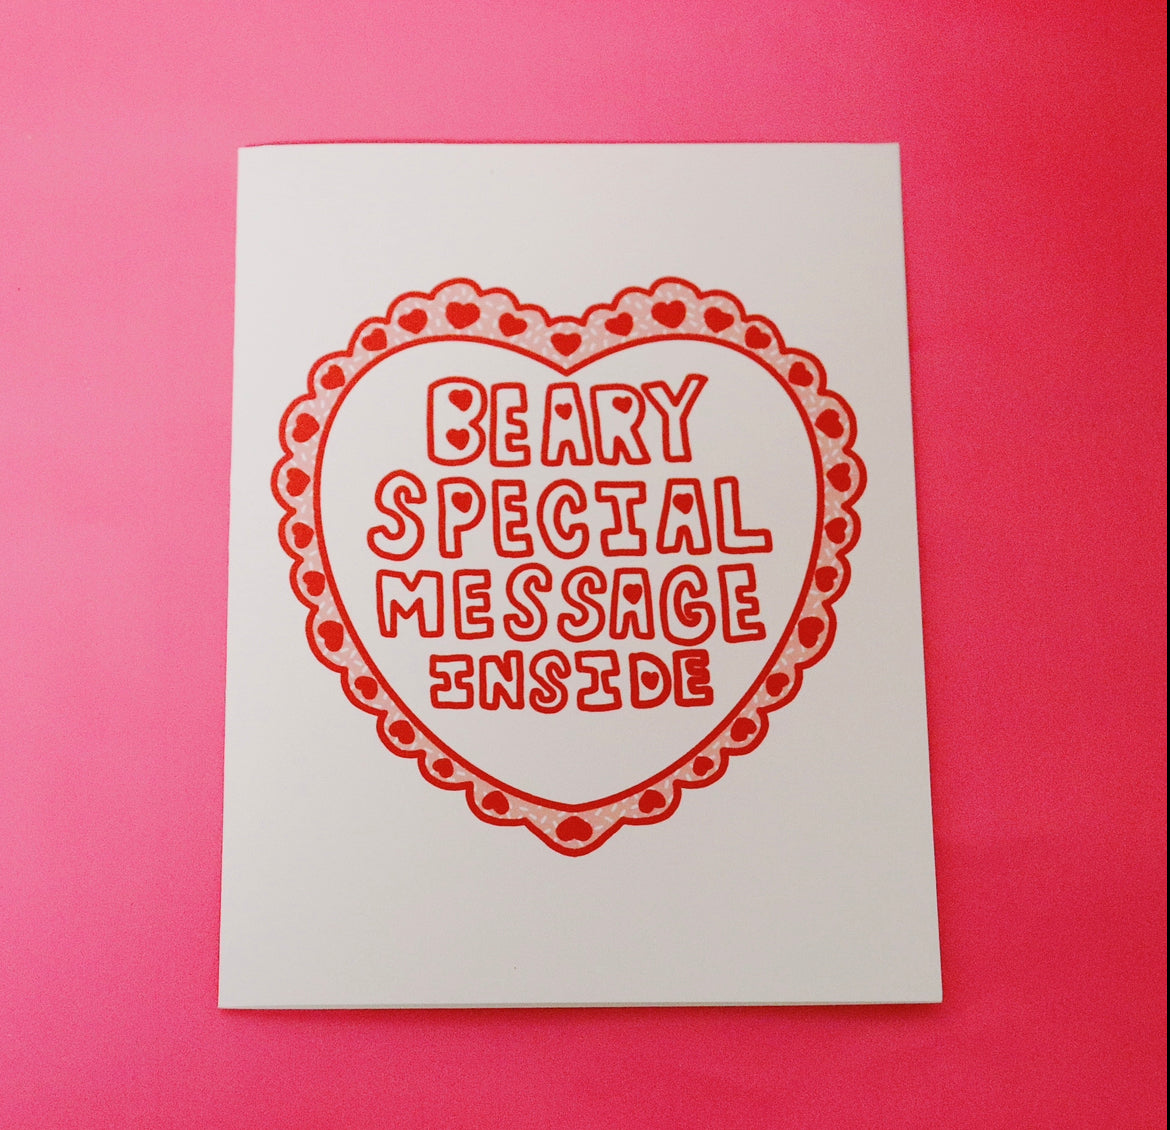 BEARY SPECIAL GREETING CARD